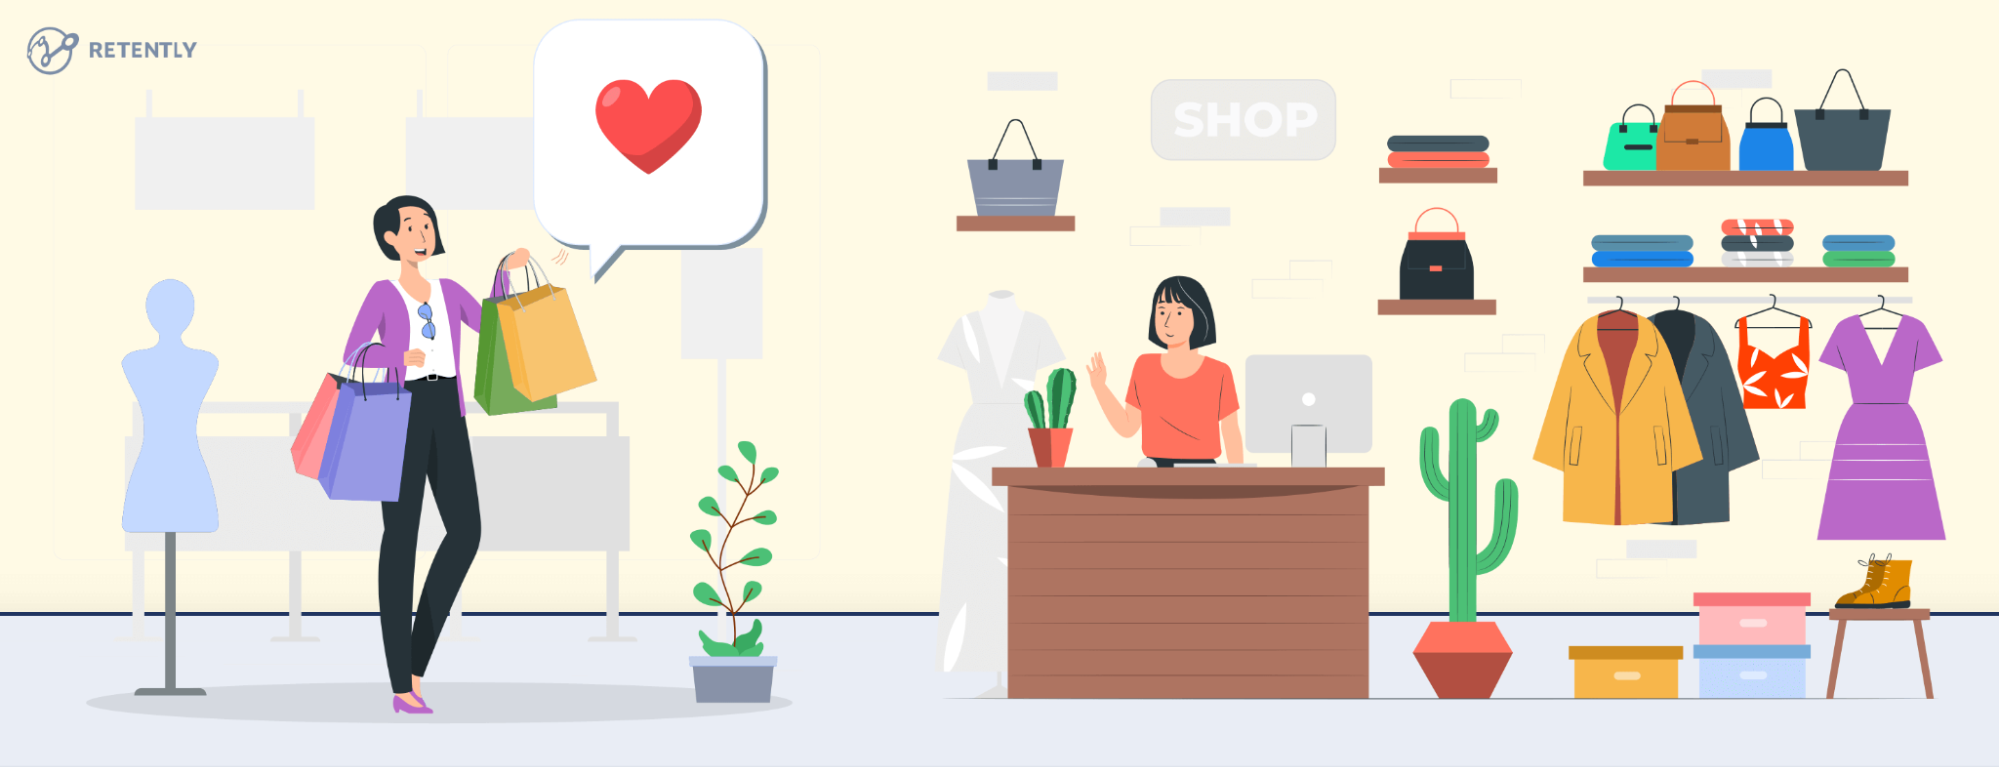 Retail Customer Experience: Strategies for Keeping Shoppers Engaged and Loyal